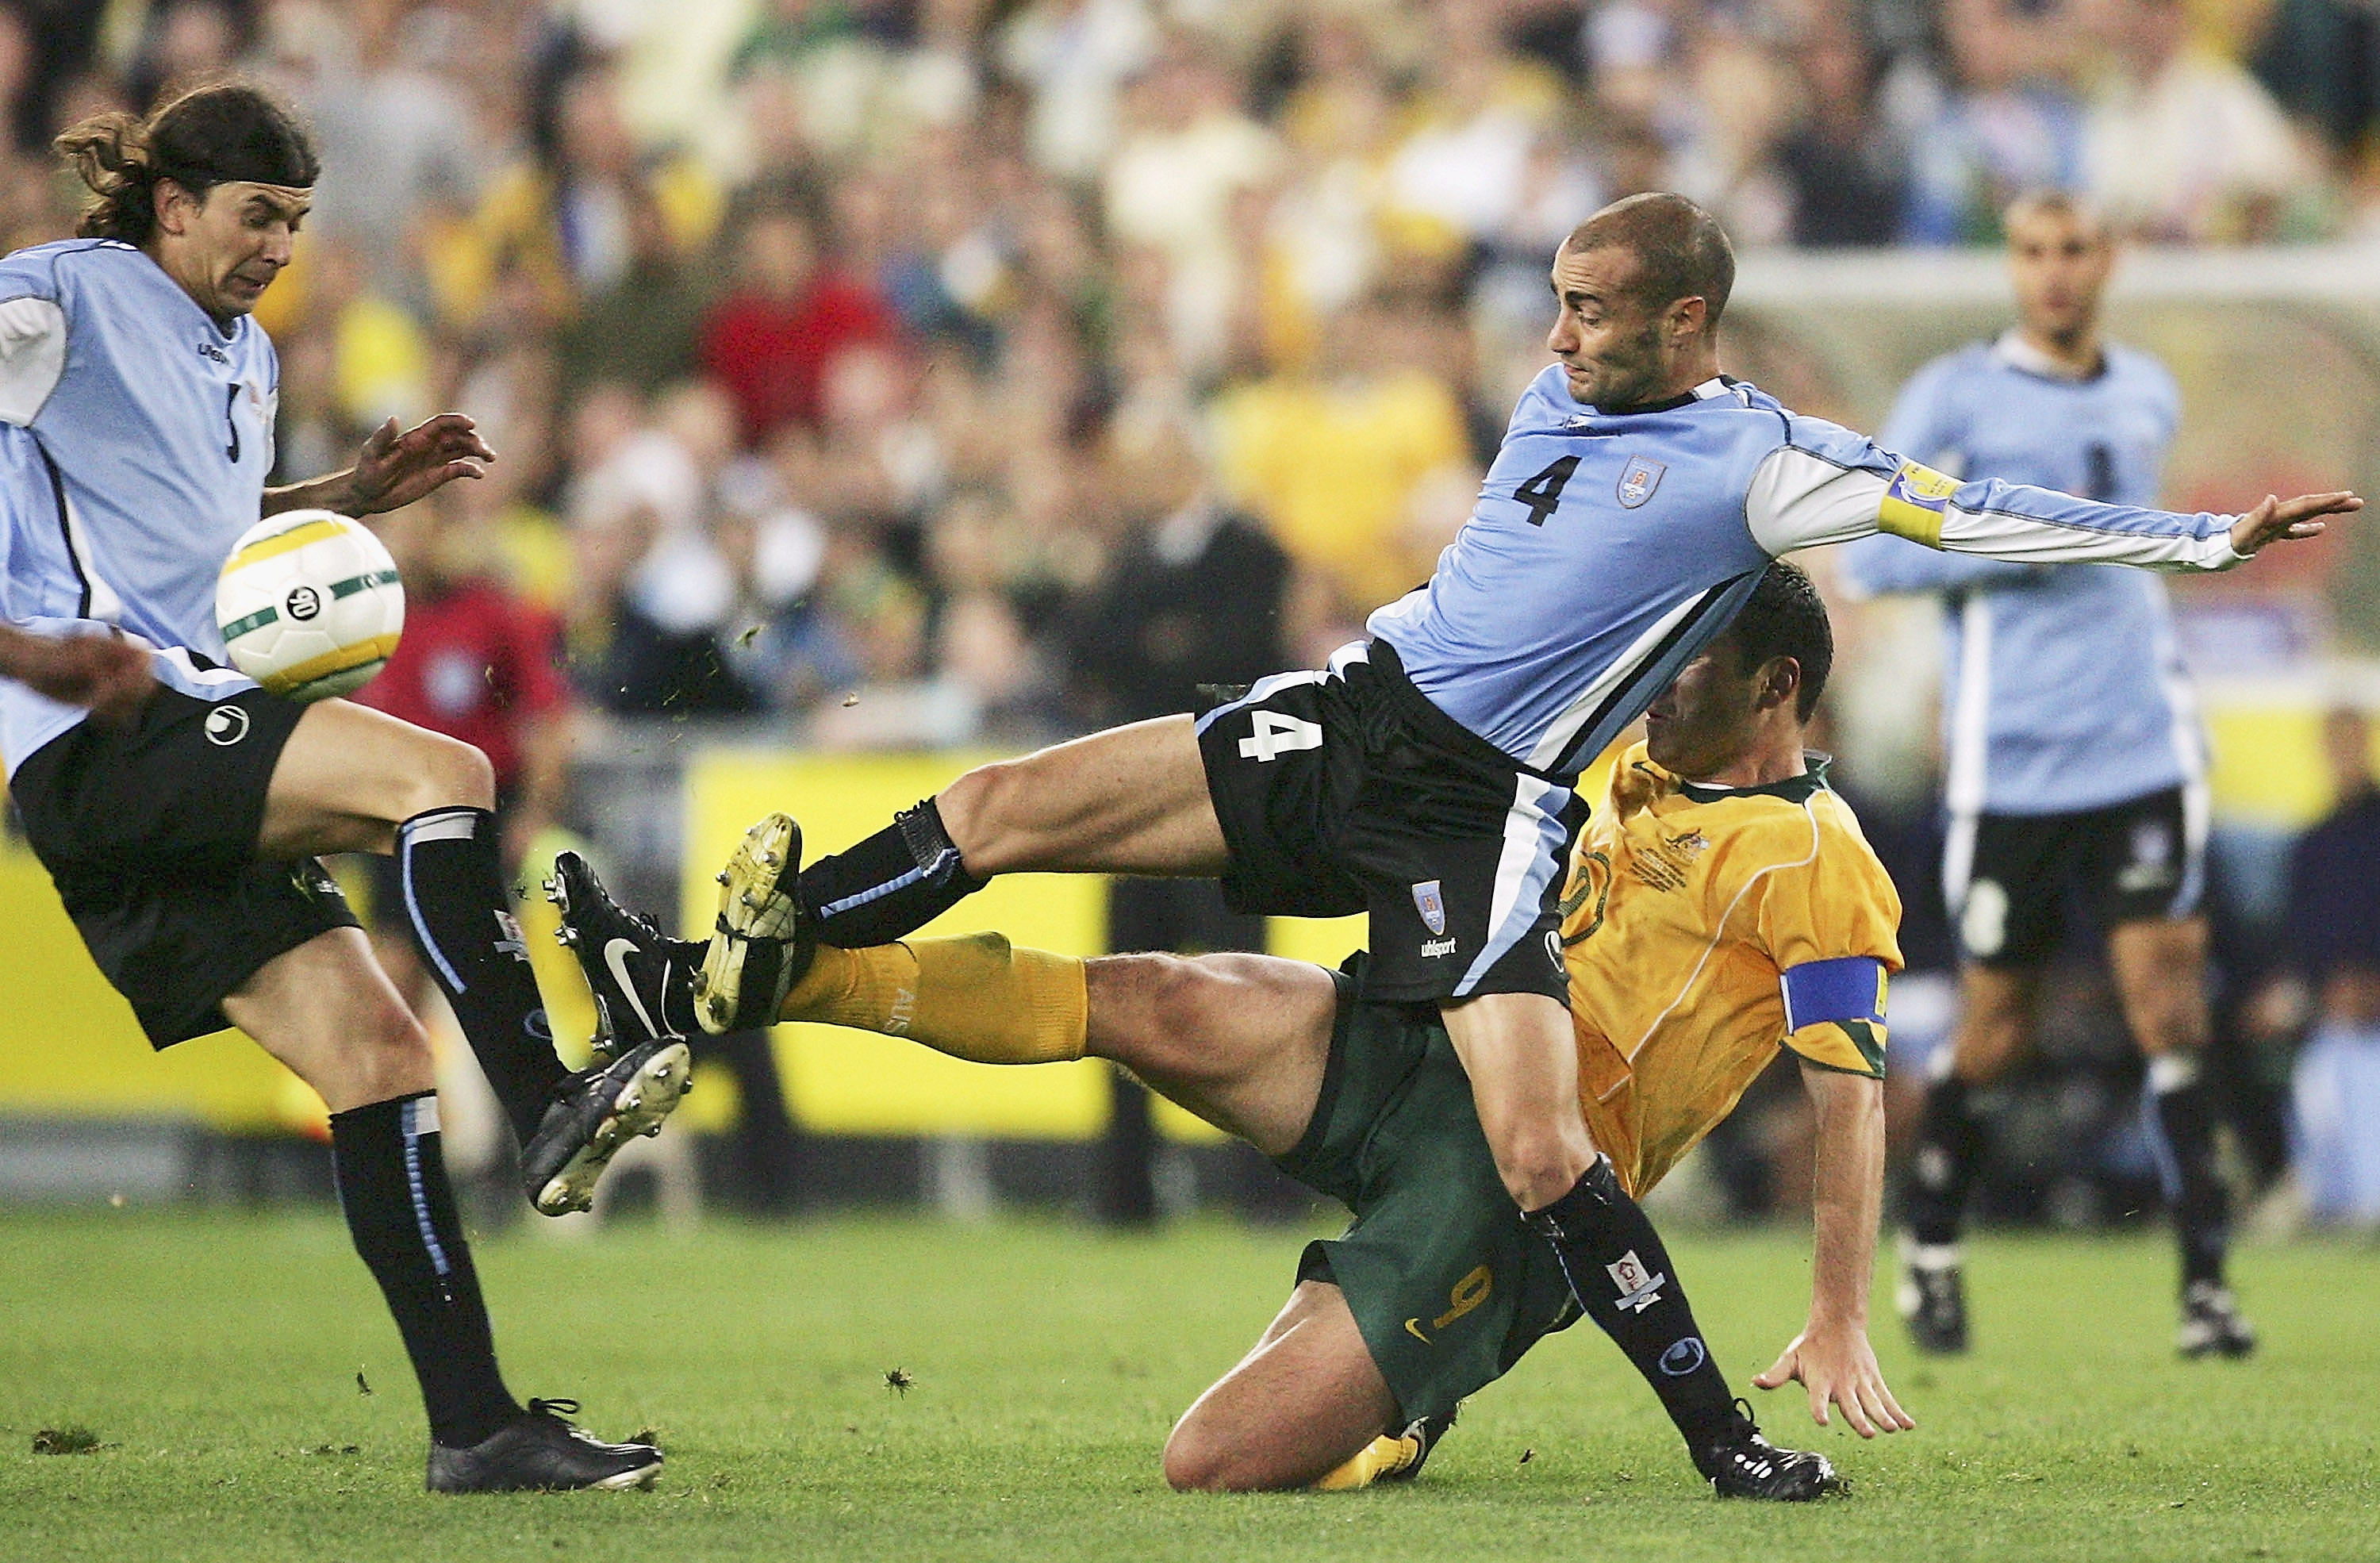 SYDNEY, NSW - NOVEMBER 16:  Paolo Montero of Uruguay in action during the second leg of the 2006 FIFA World Cup qualifying match between Australia and Uruguay at Telstra Stadium on November 16, 2005 in Sydney, Australia.  (Photo by Adam Pretty/Getty Image